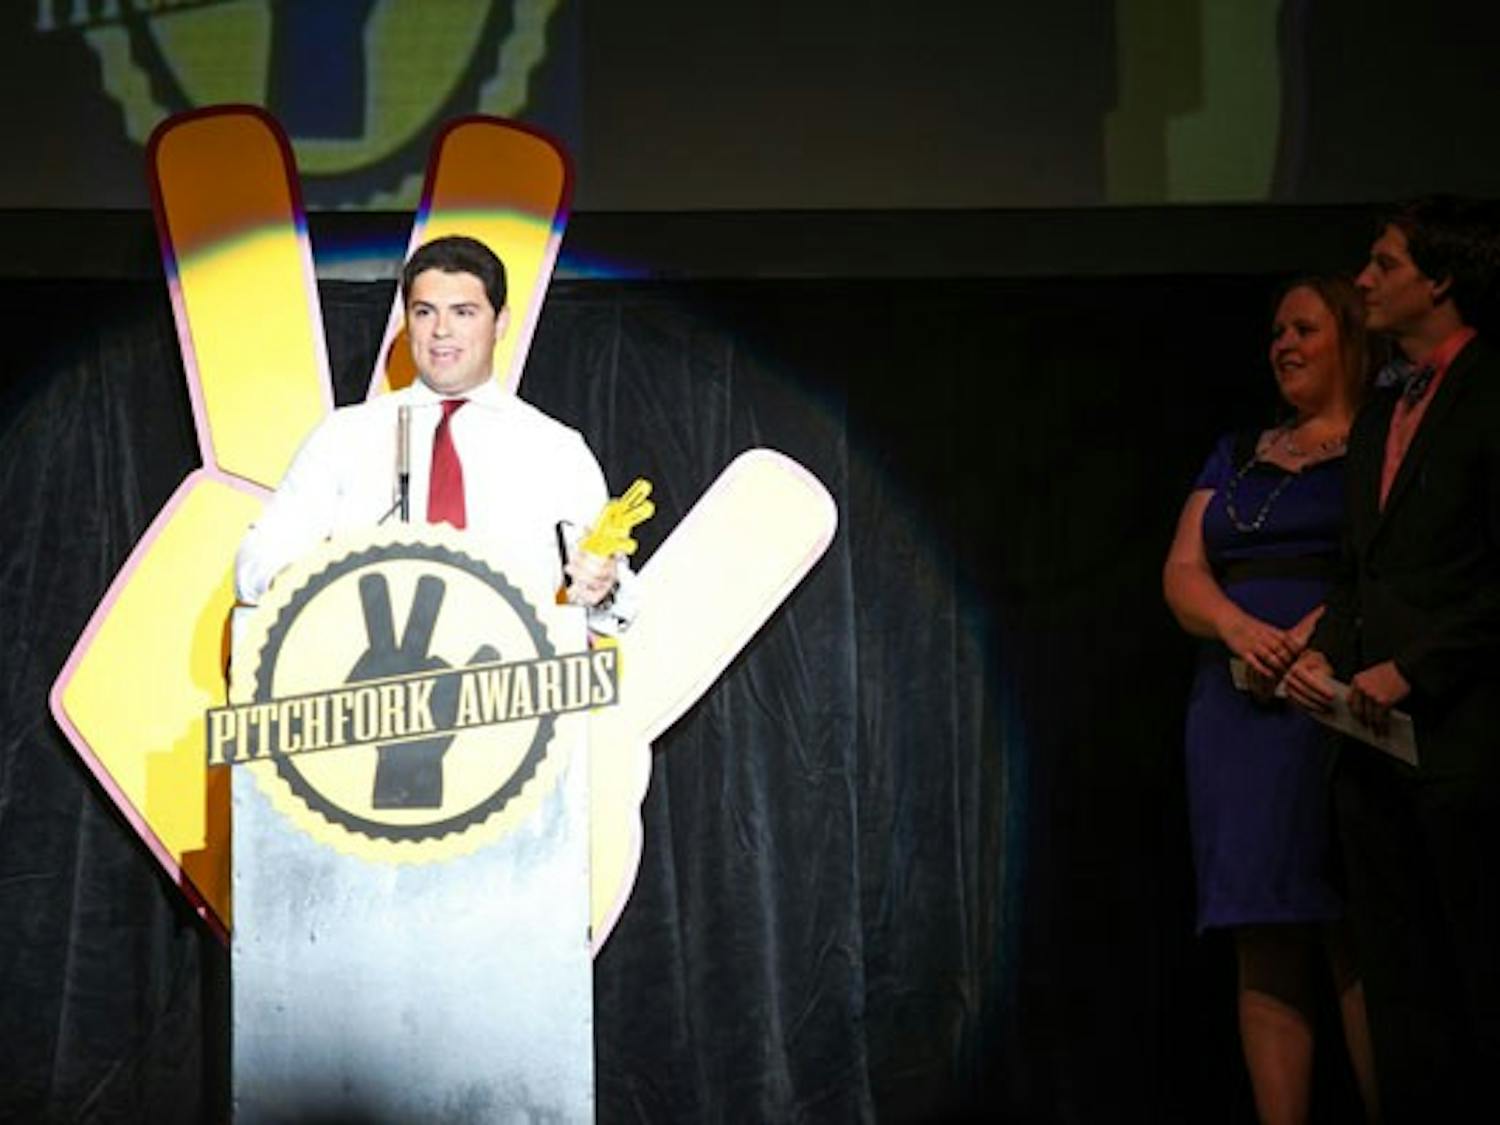 Journalism major Jared Cooper won the award for best Sun Devil Spirit. The Pitchfork Awards celebrates the achievements of students, organizations and other ASU initiatives Thursday at Orpheum Theater in downtown Phoenix. (Photo by Perla Farias)